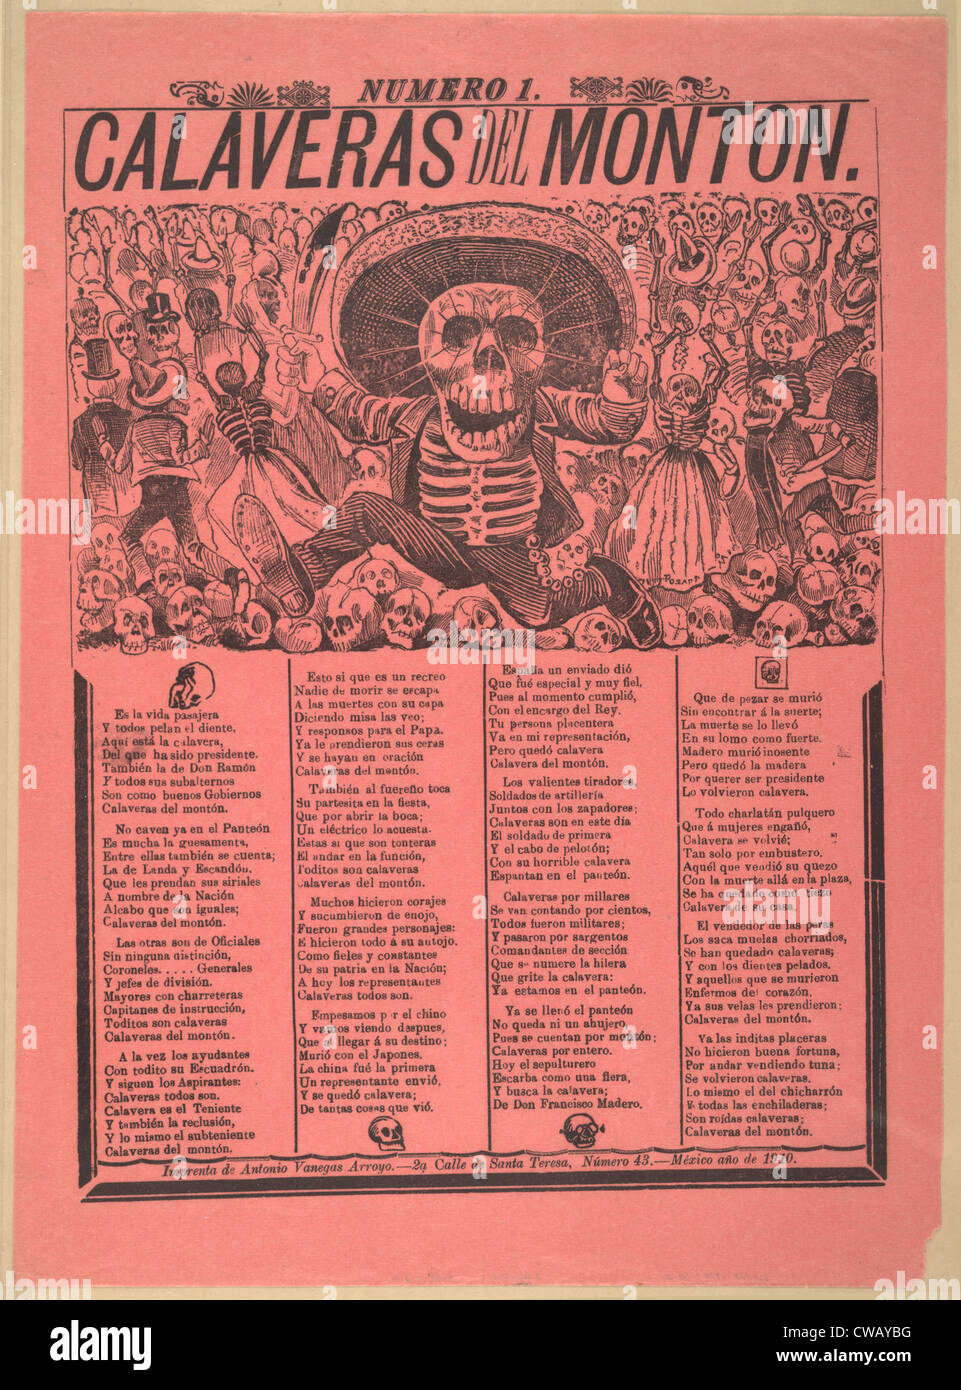 Calaveras del monton, numero 1, translation: Skulls from the heap, number 1, Broadside showing a male skeleton dressed in a Stock Photo